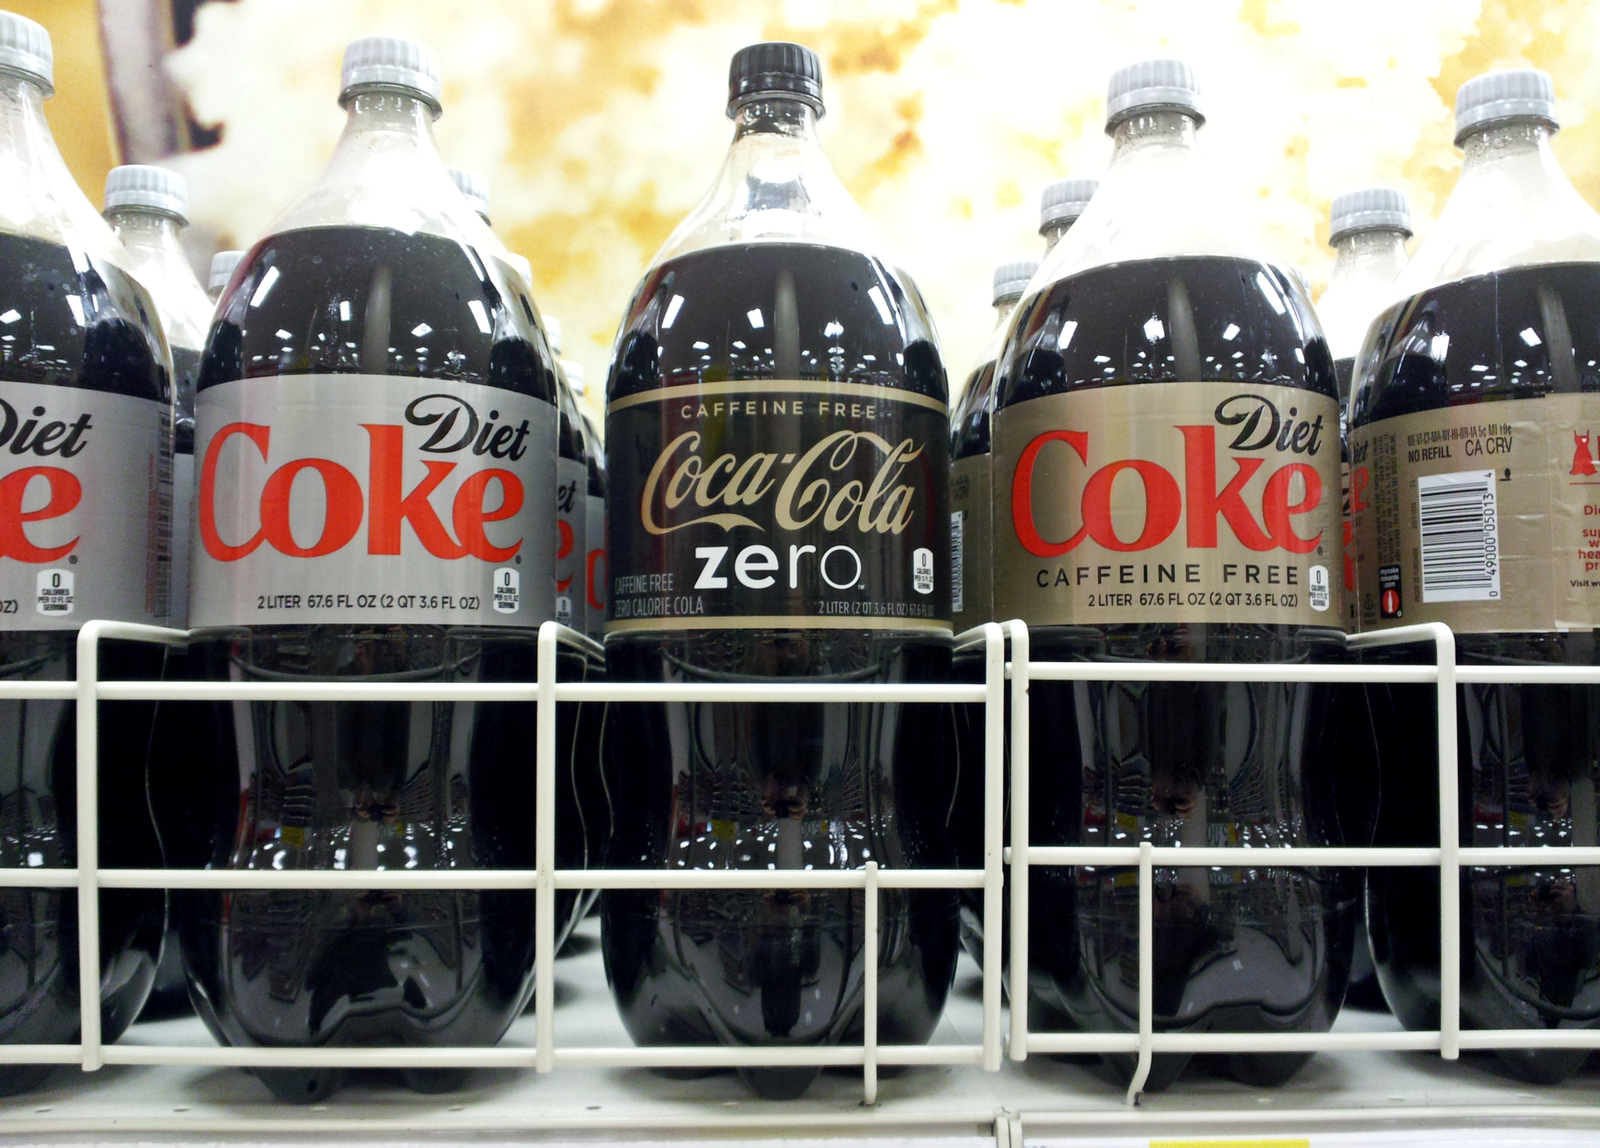 “Limited evidence” for aspartame as “possible carcinogen,” says WHO cancer agency